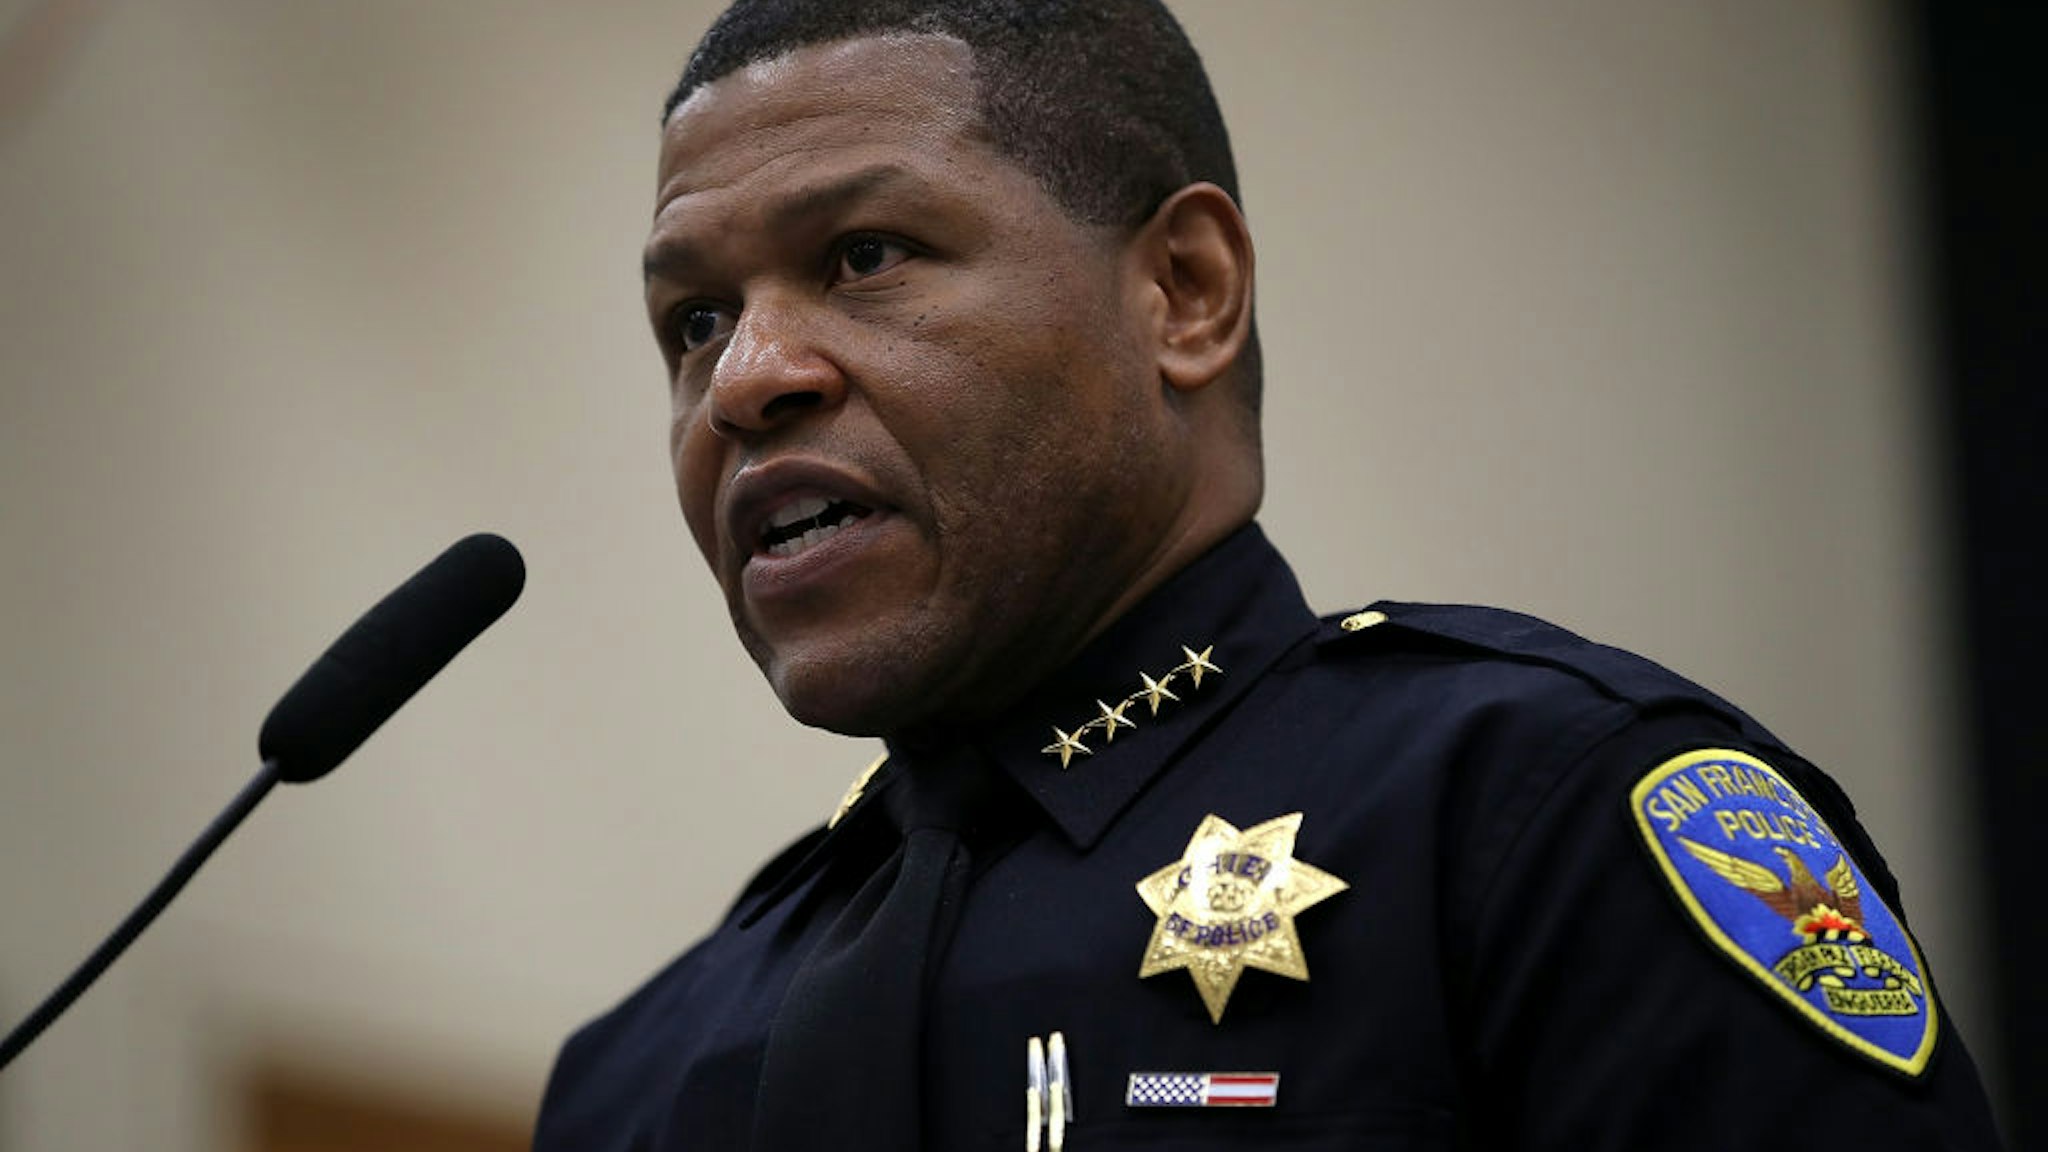 San Francisco police chief Bill Scott speaks during a news conference at the San Francisco Police Academy on May 15, 2018 in San Francisco, California.